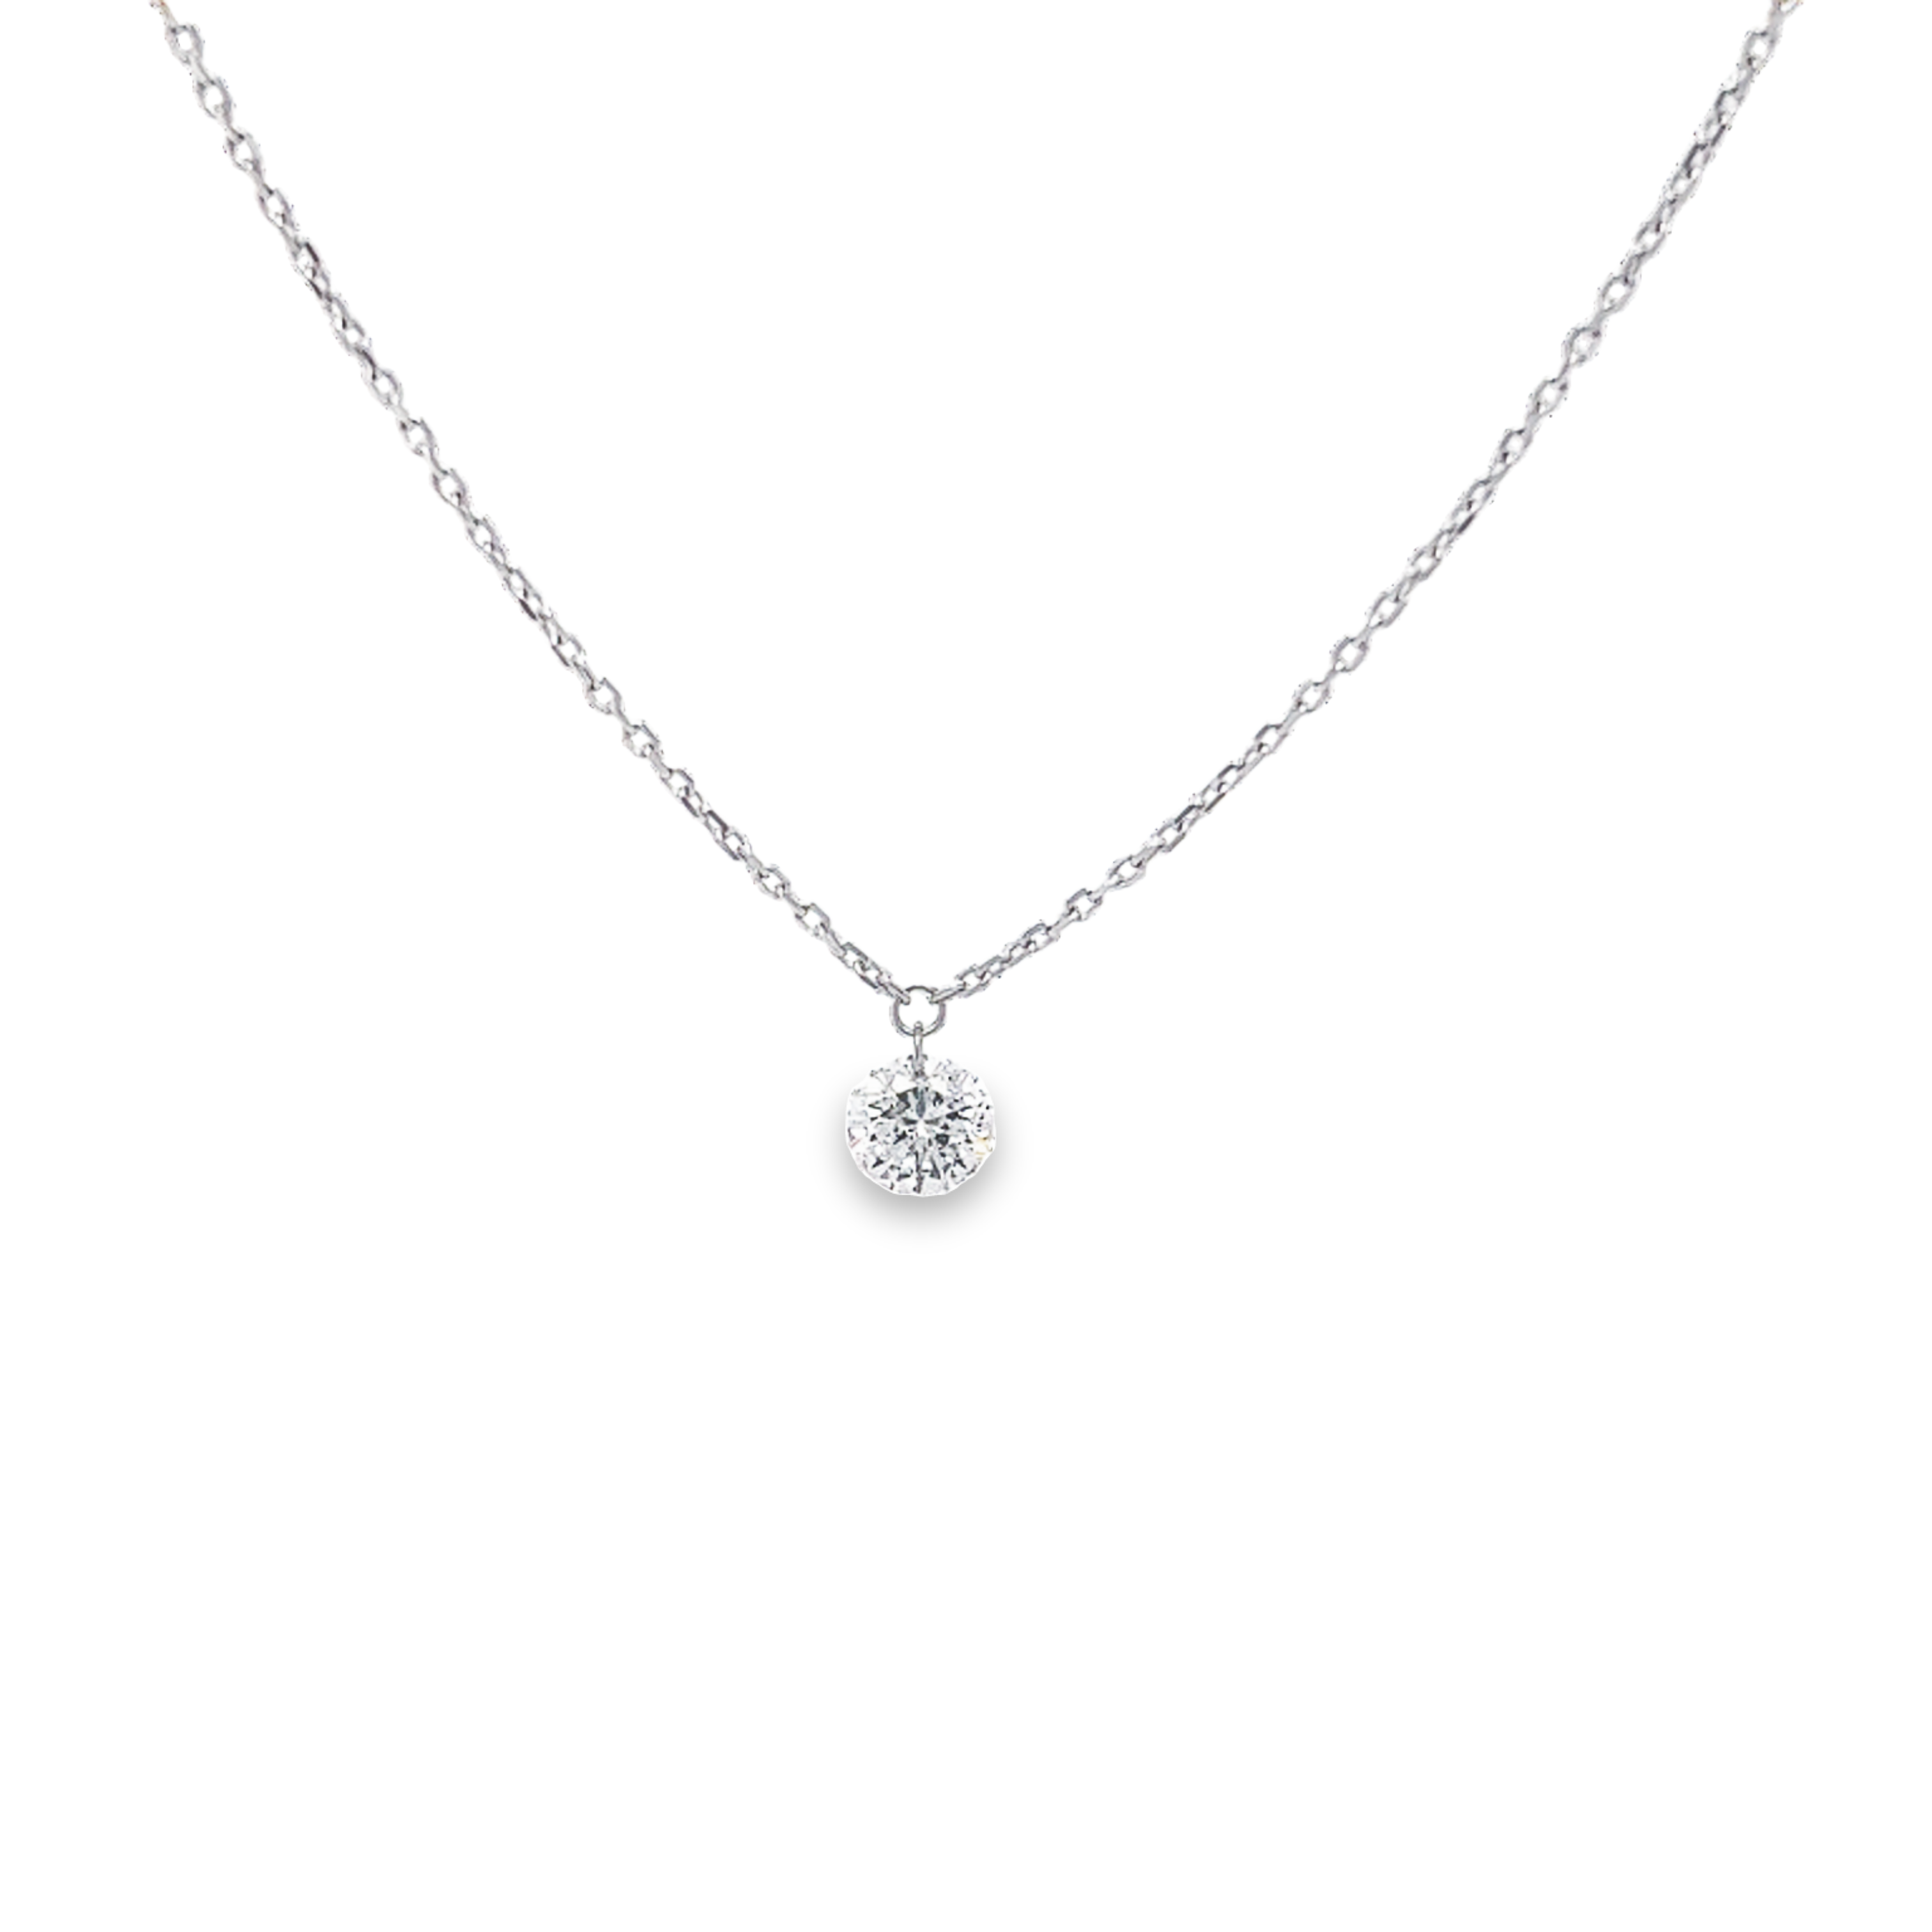 14 Karat white gold solitaire necklace with one 0.33ct Round Brilliant G I Diamond